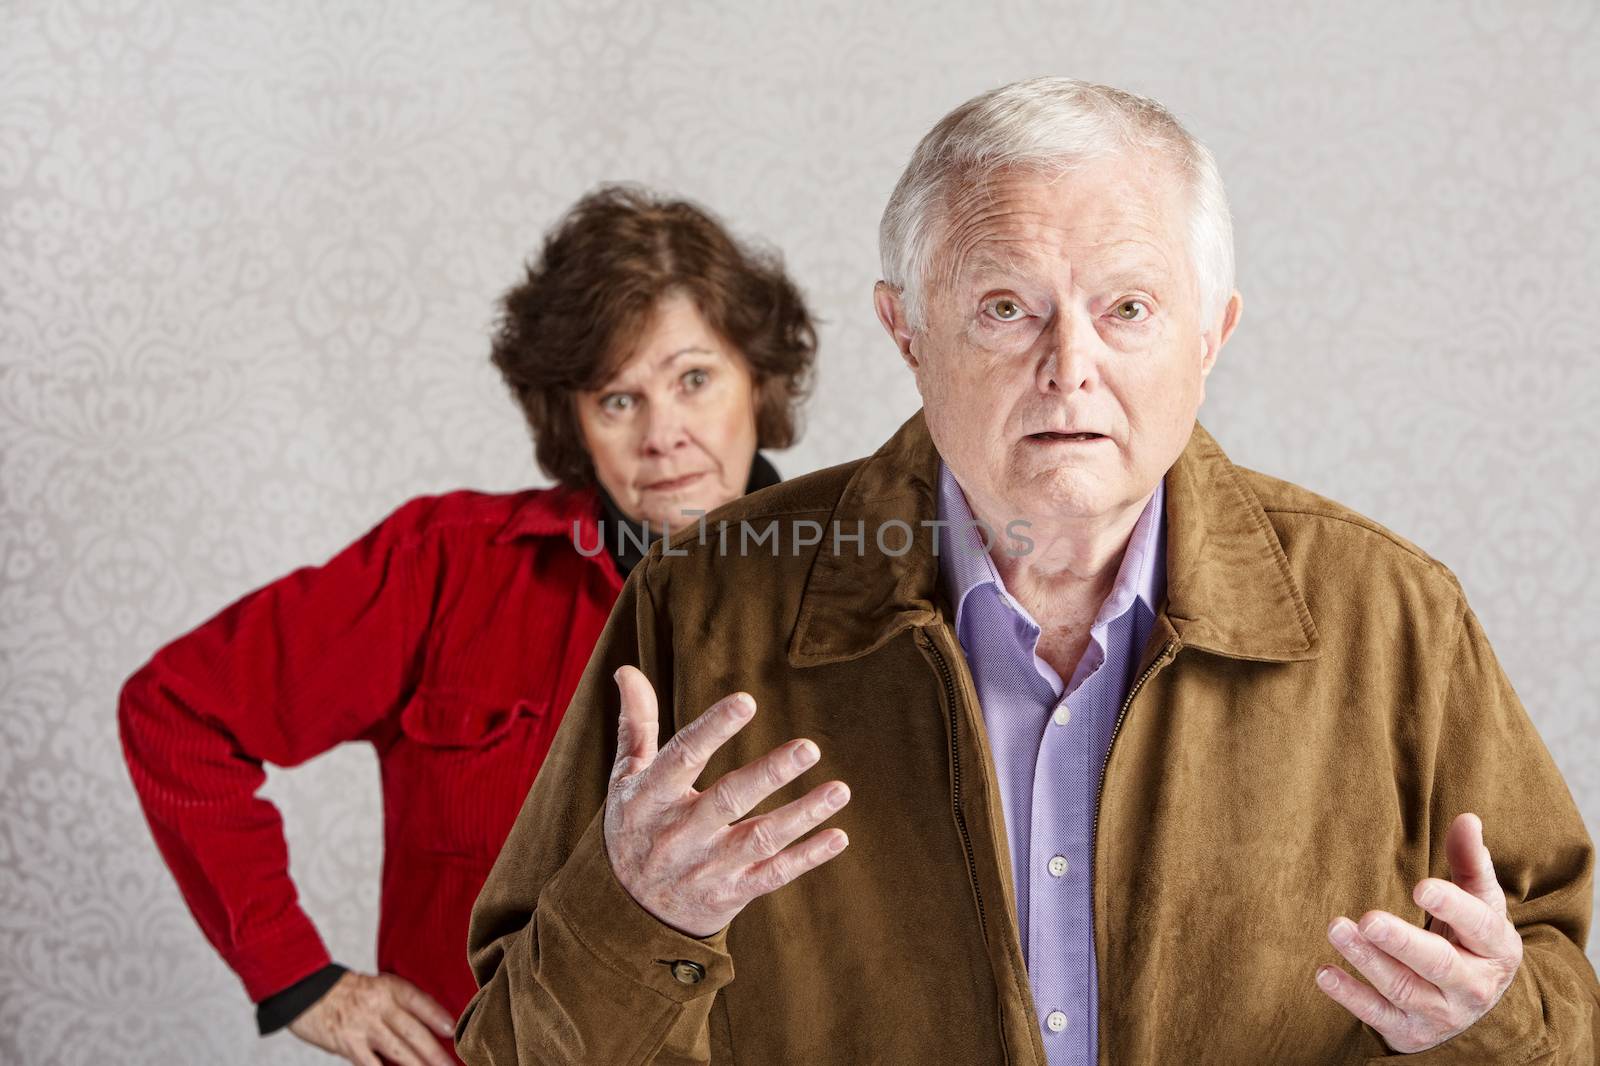 Frustrated older man with hands up and annoyed woman